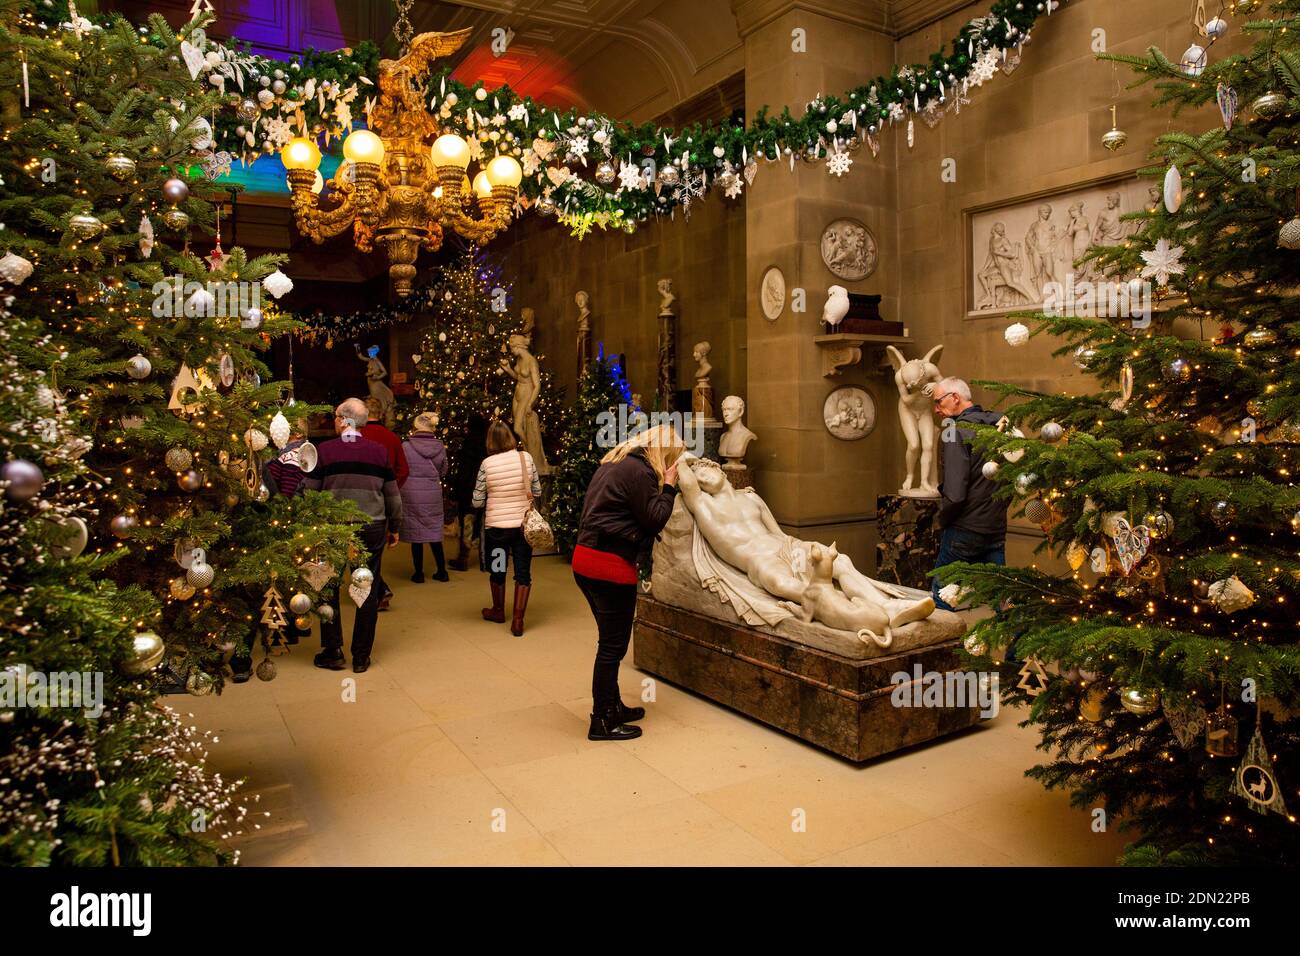 UK, England, Derbyshire, Edensor, Chatsworth House Sculpture Gallery at Christmas, people visiting to see decorations Stock Photo